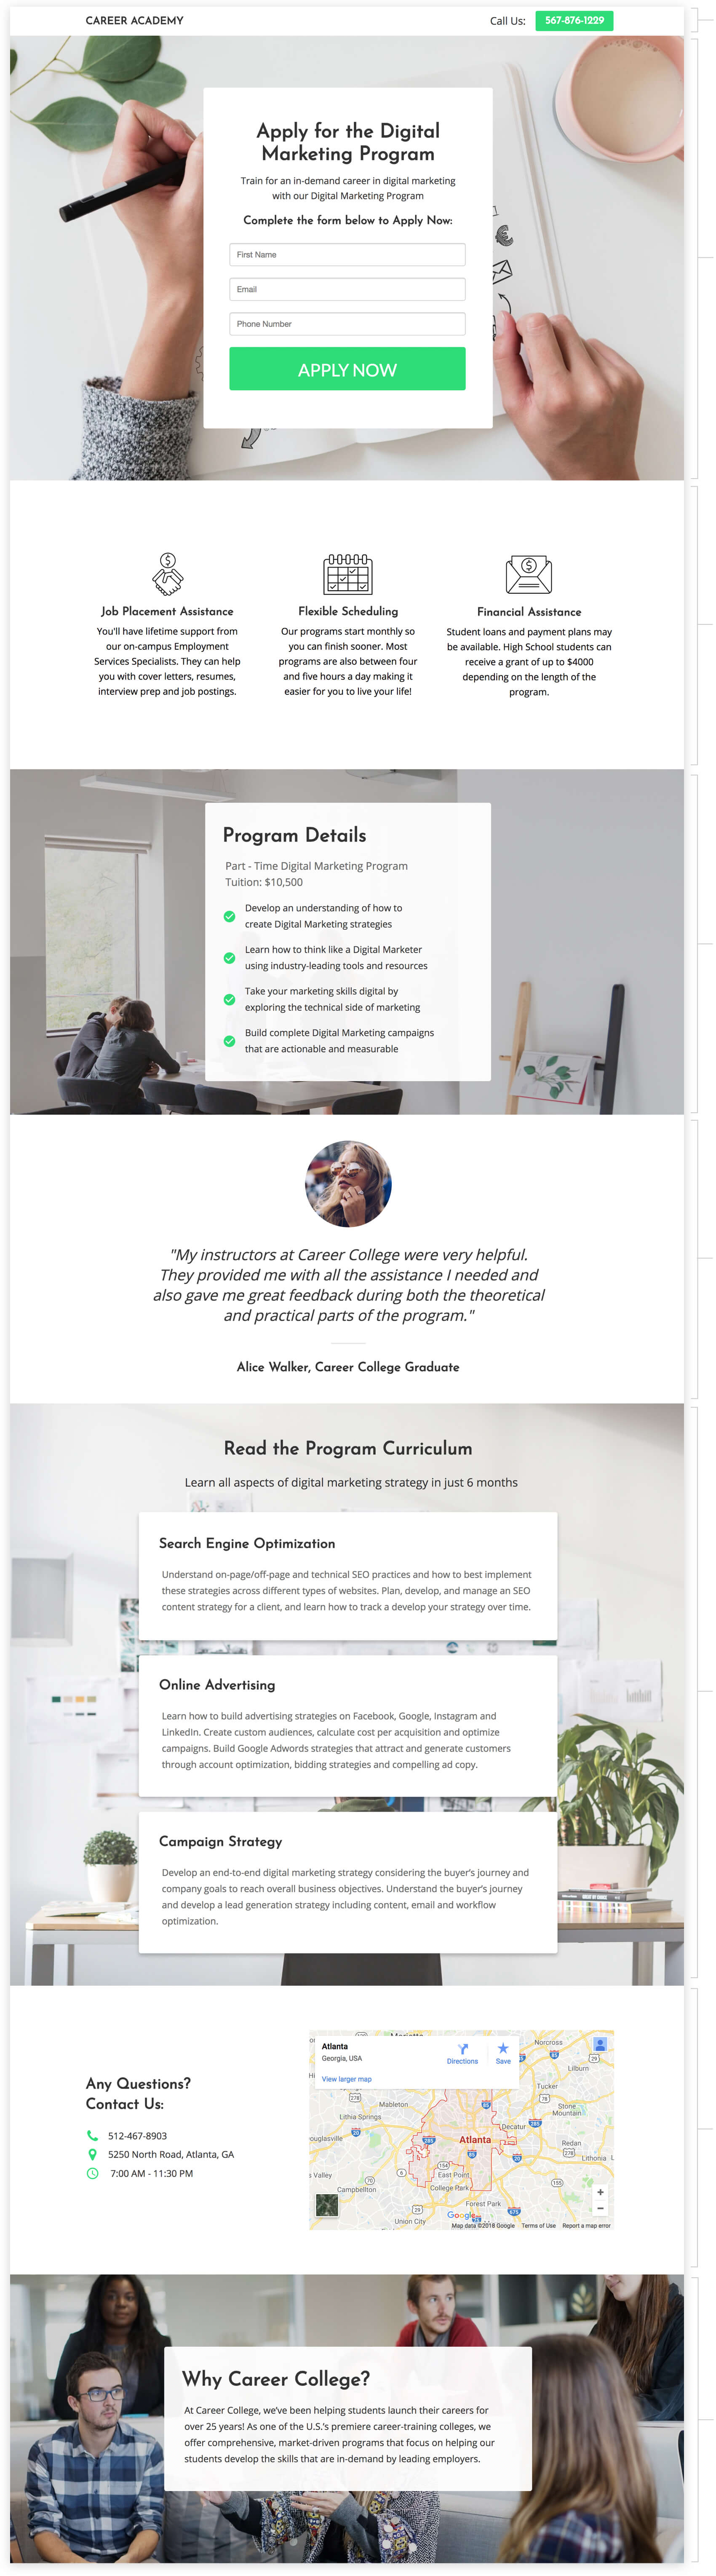 apply for a program landing page